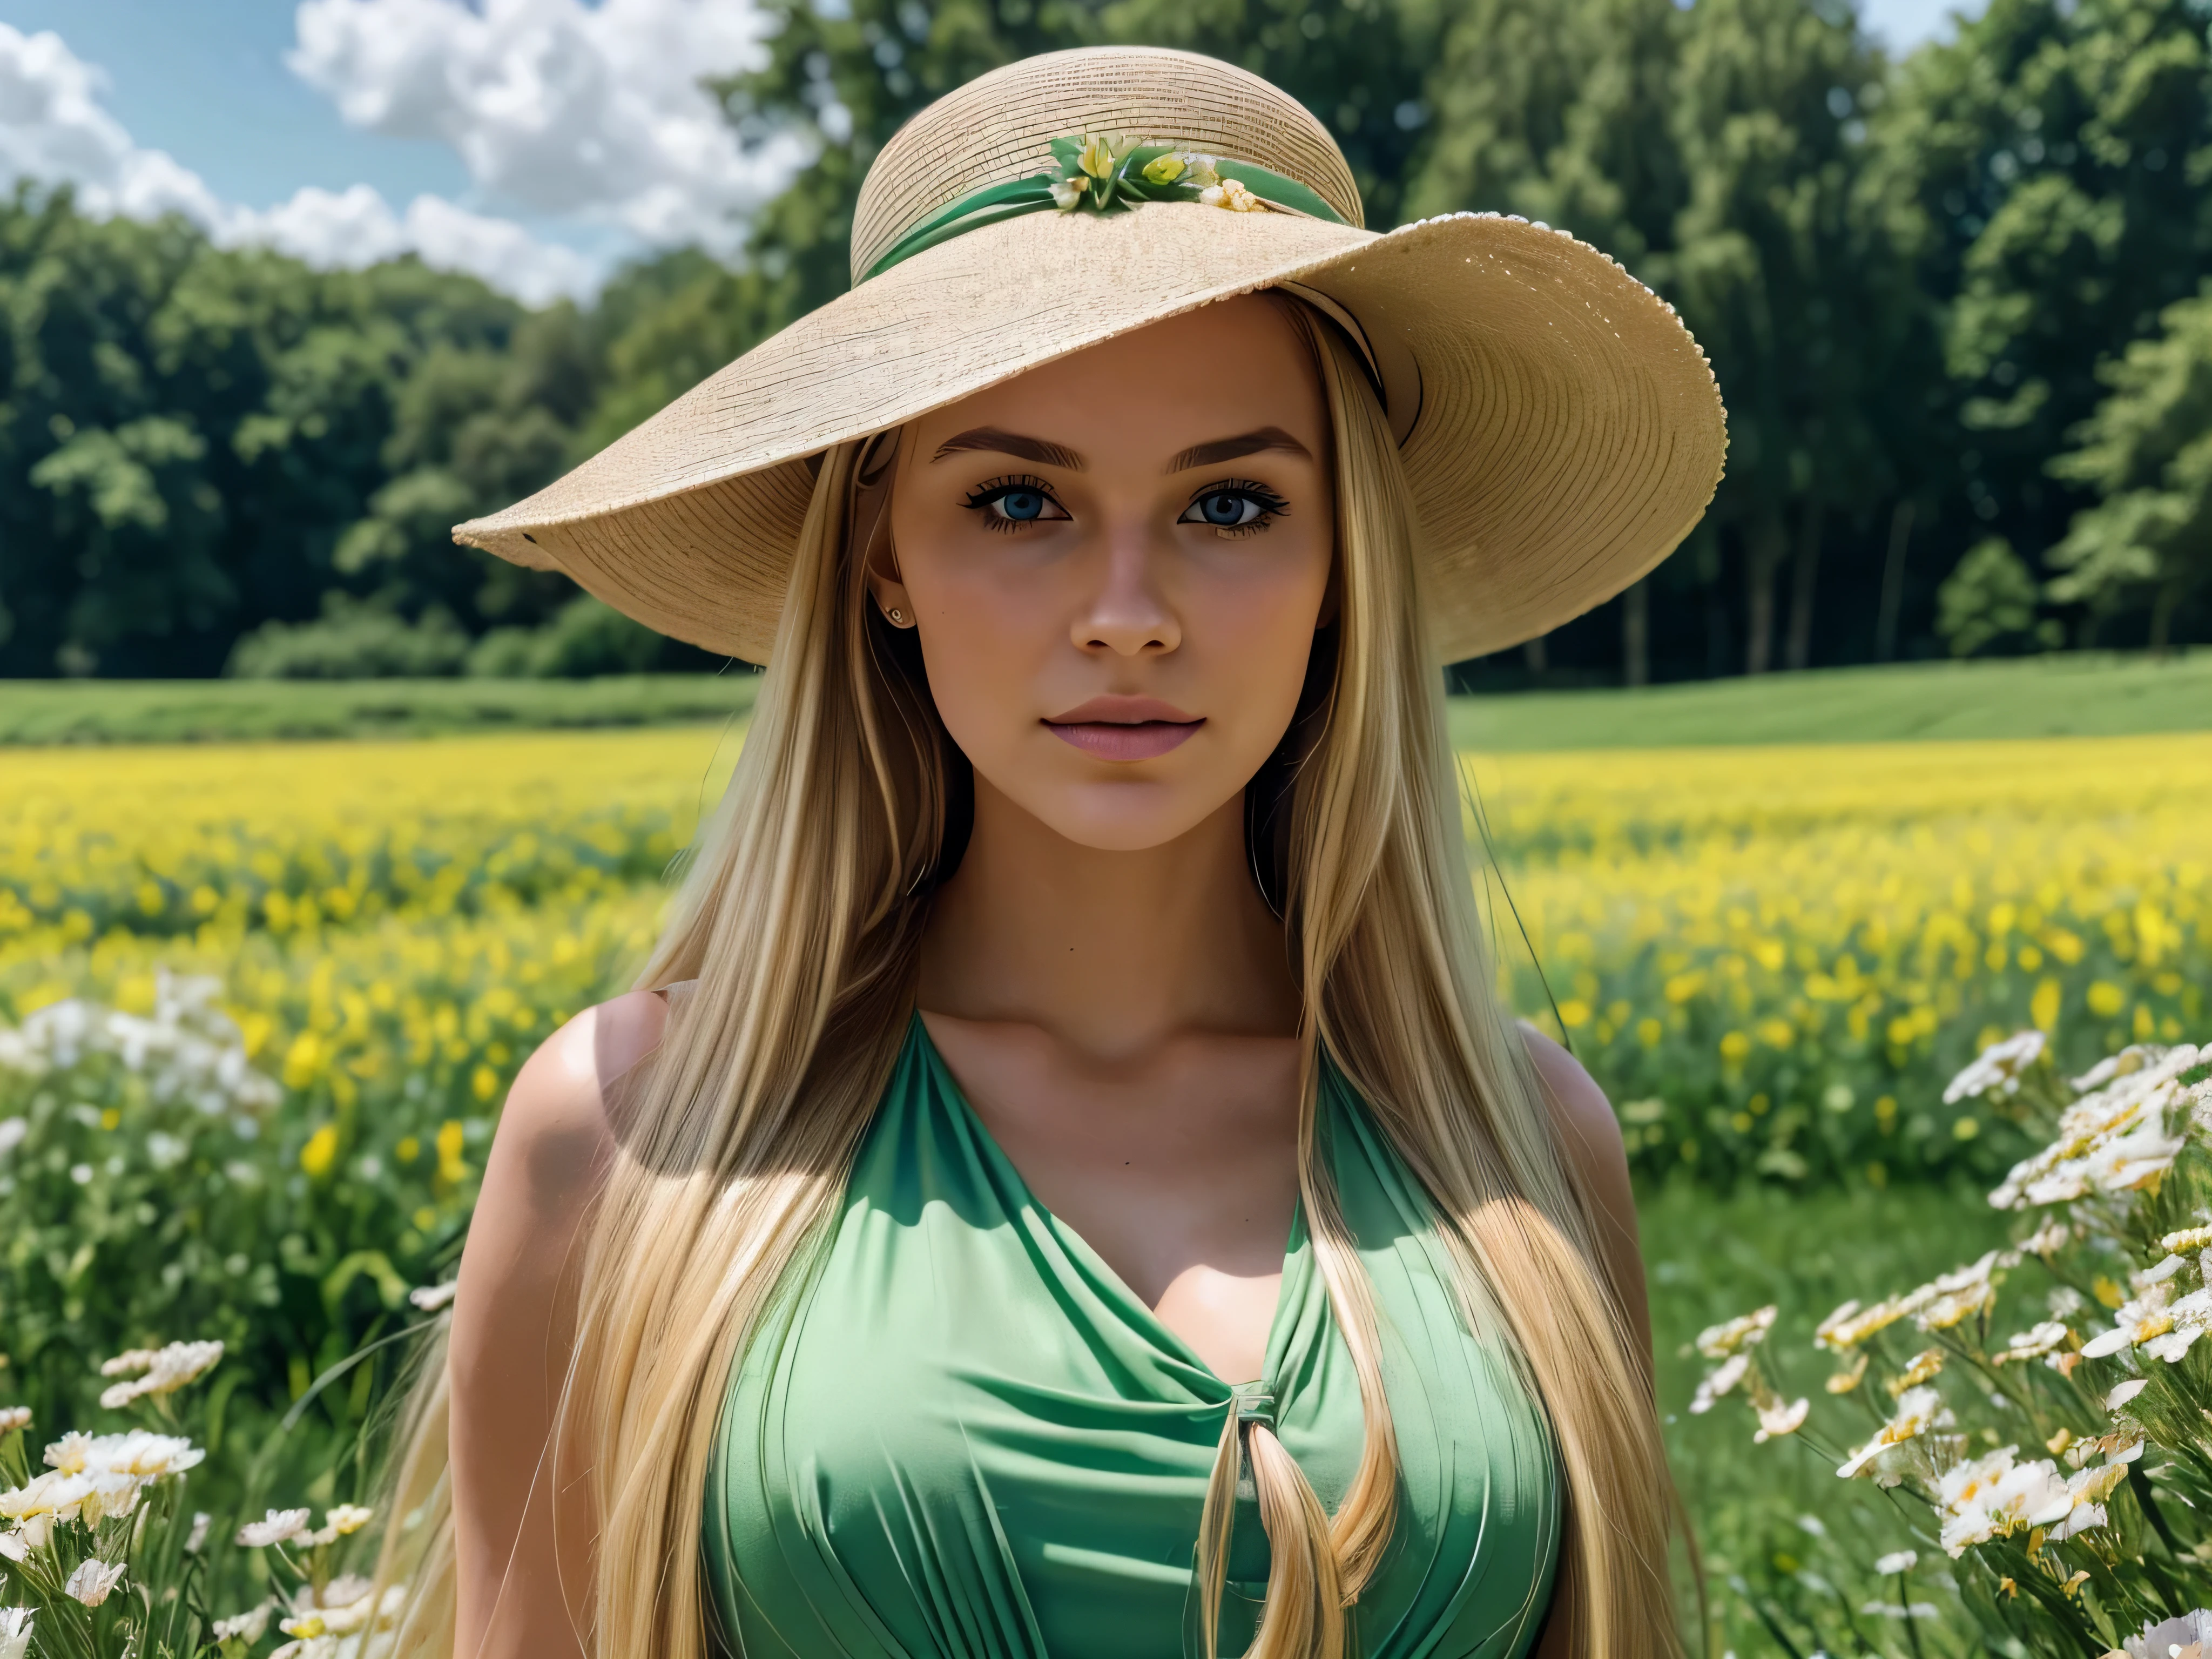 (wide angle, best quality, highres, ultra-detailed), a beautiful blonde woman in a green dress and hat in a flowery field, beautiful maiden, beautiful reality maiden, beautiful reality art portrait, beautiful reality portrait, matte painting portrait shot, reality art portrait, beautiful character painting, reality portrait, reality genre portrait, beautiful portrait image, reality portrait art, princess portrait